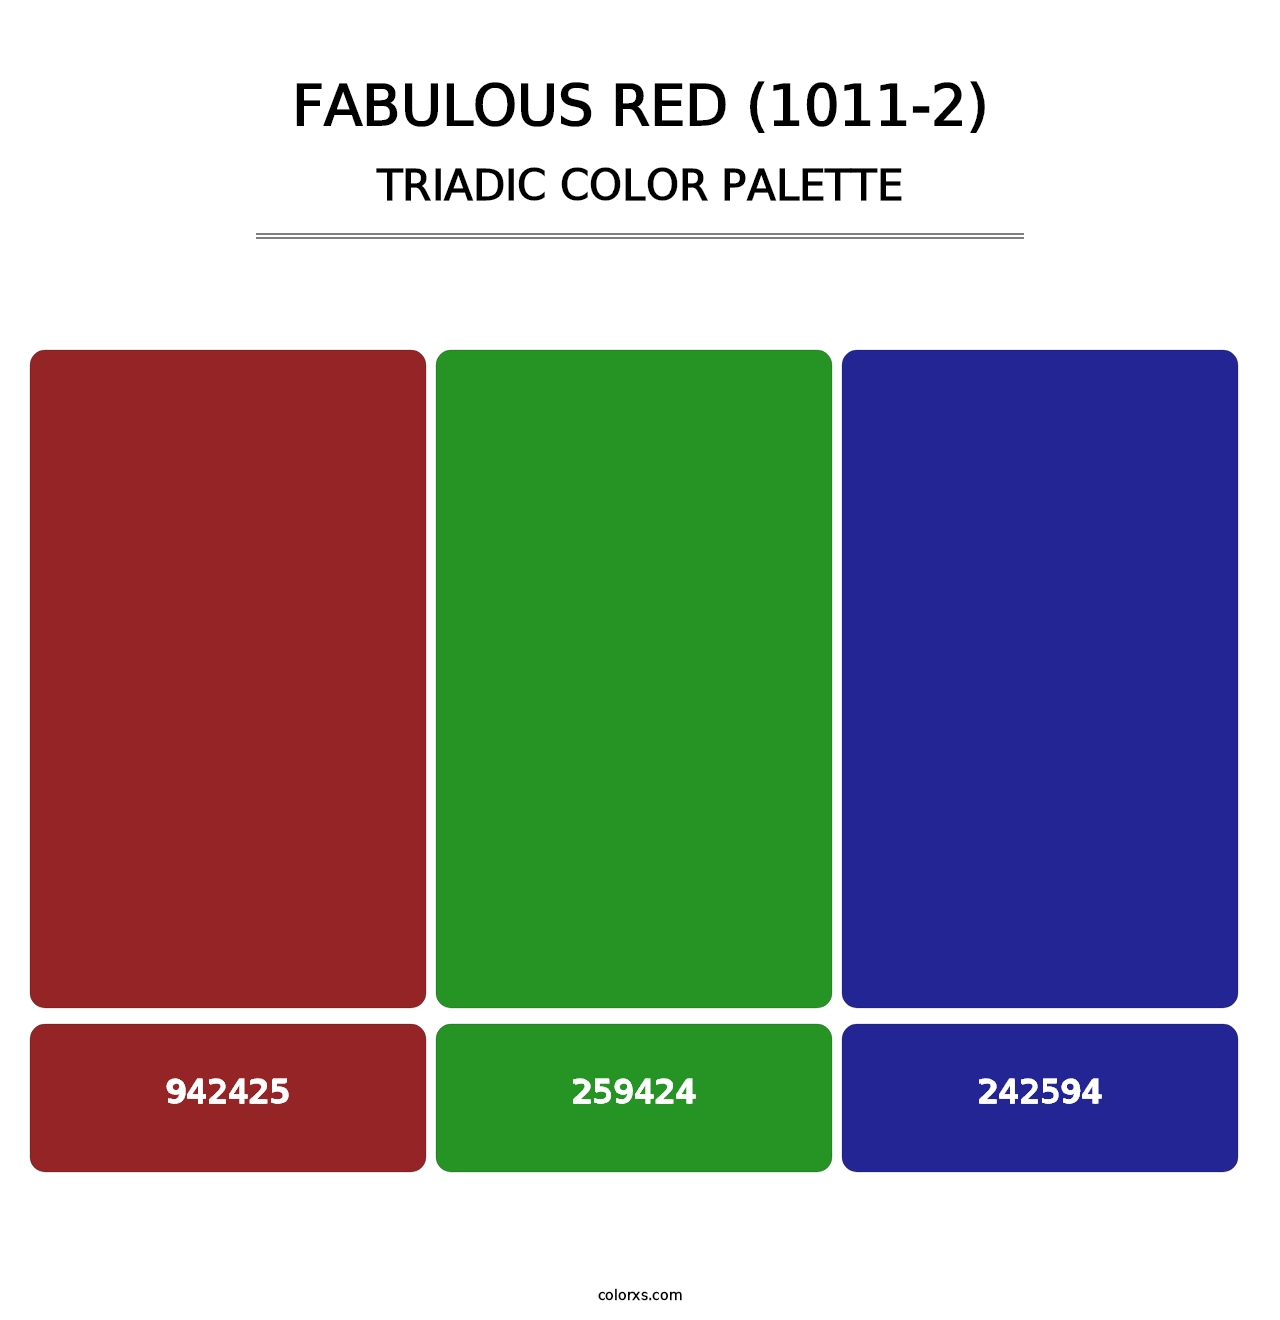 Fabulous Red (1011-2) - Triadic Color Palette